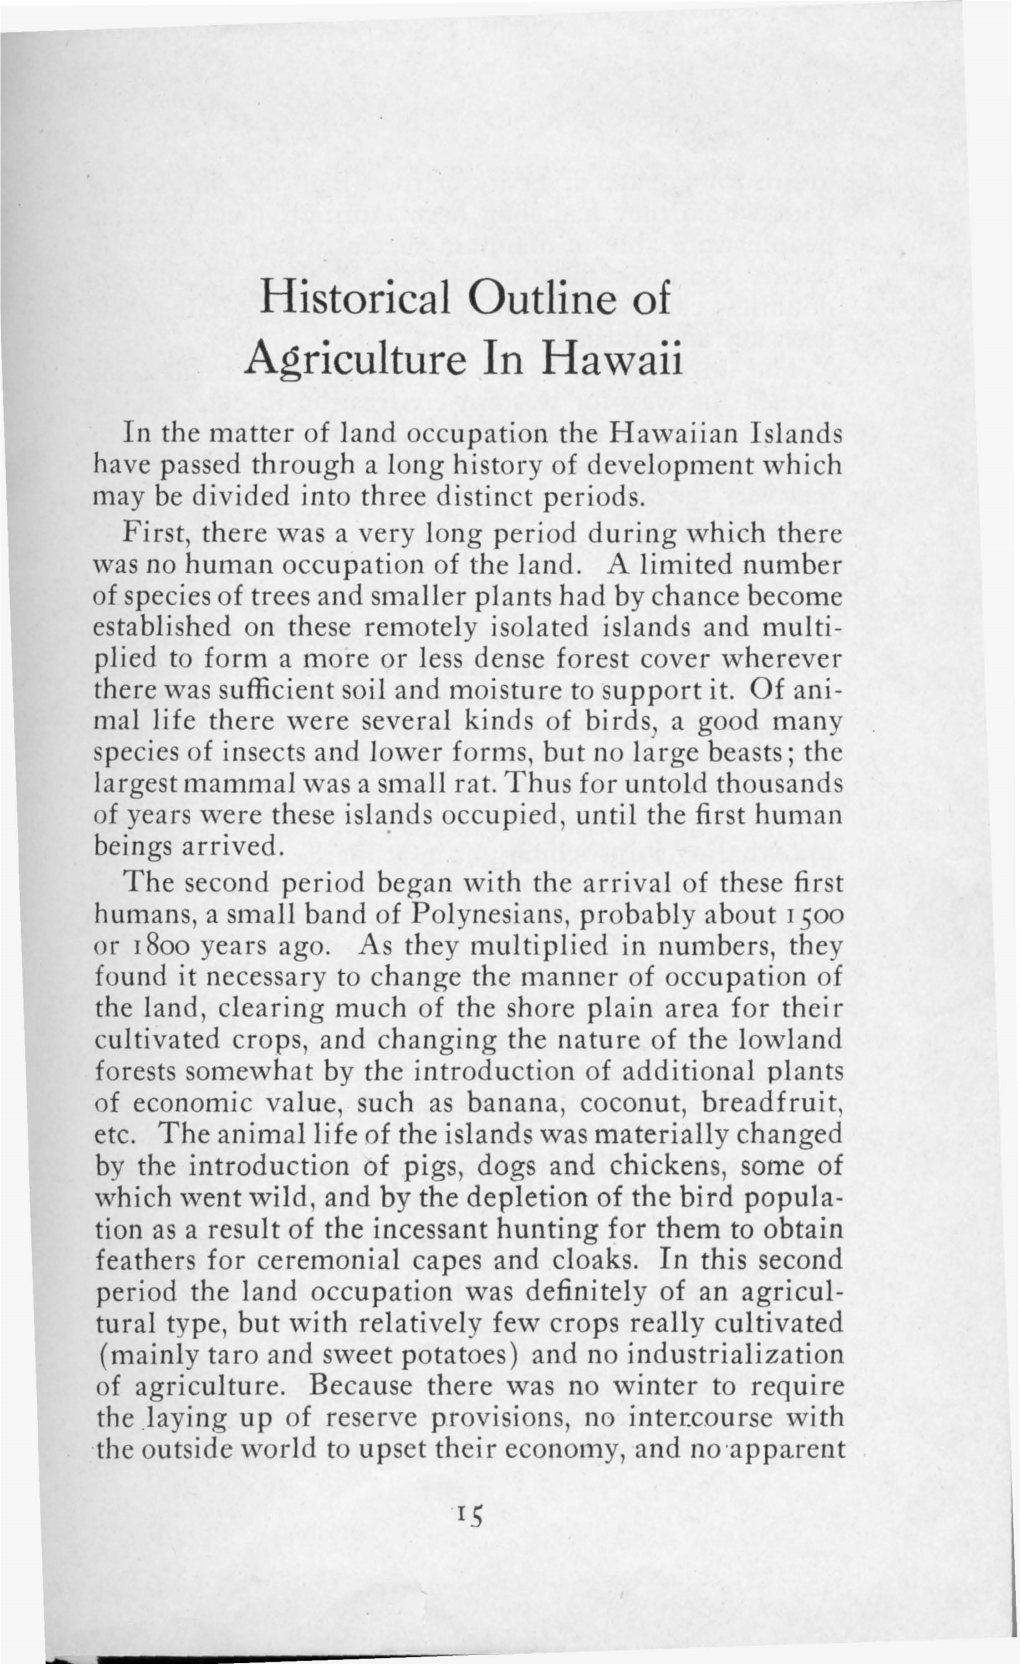 Historical Outline of Agriculture in Hawaii